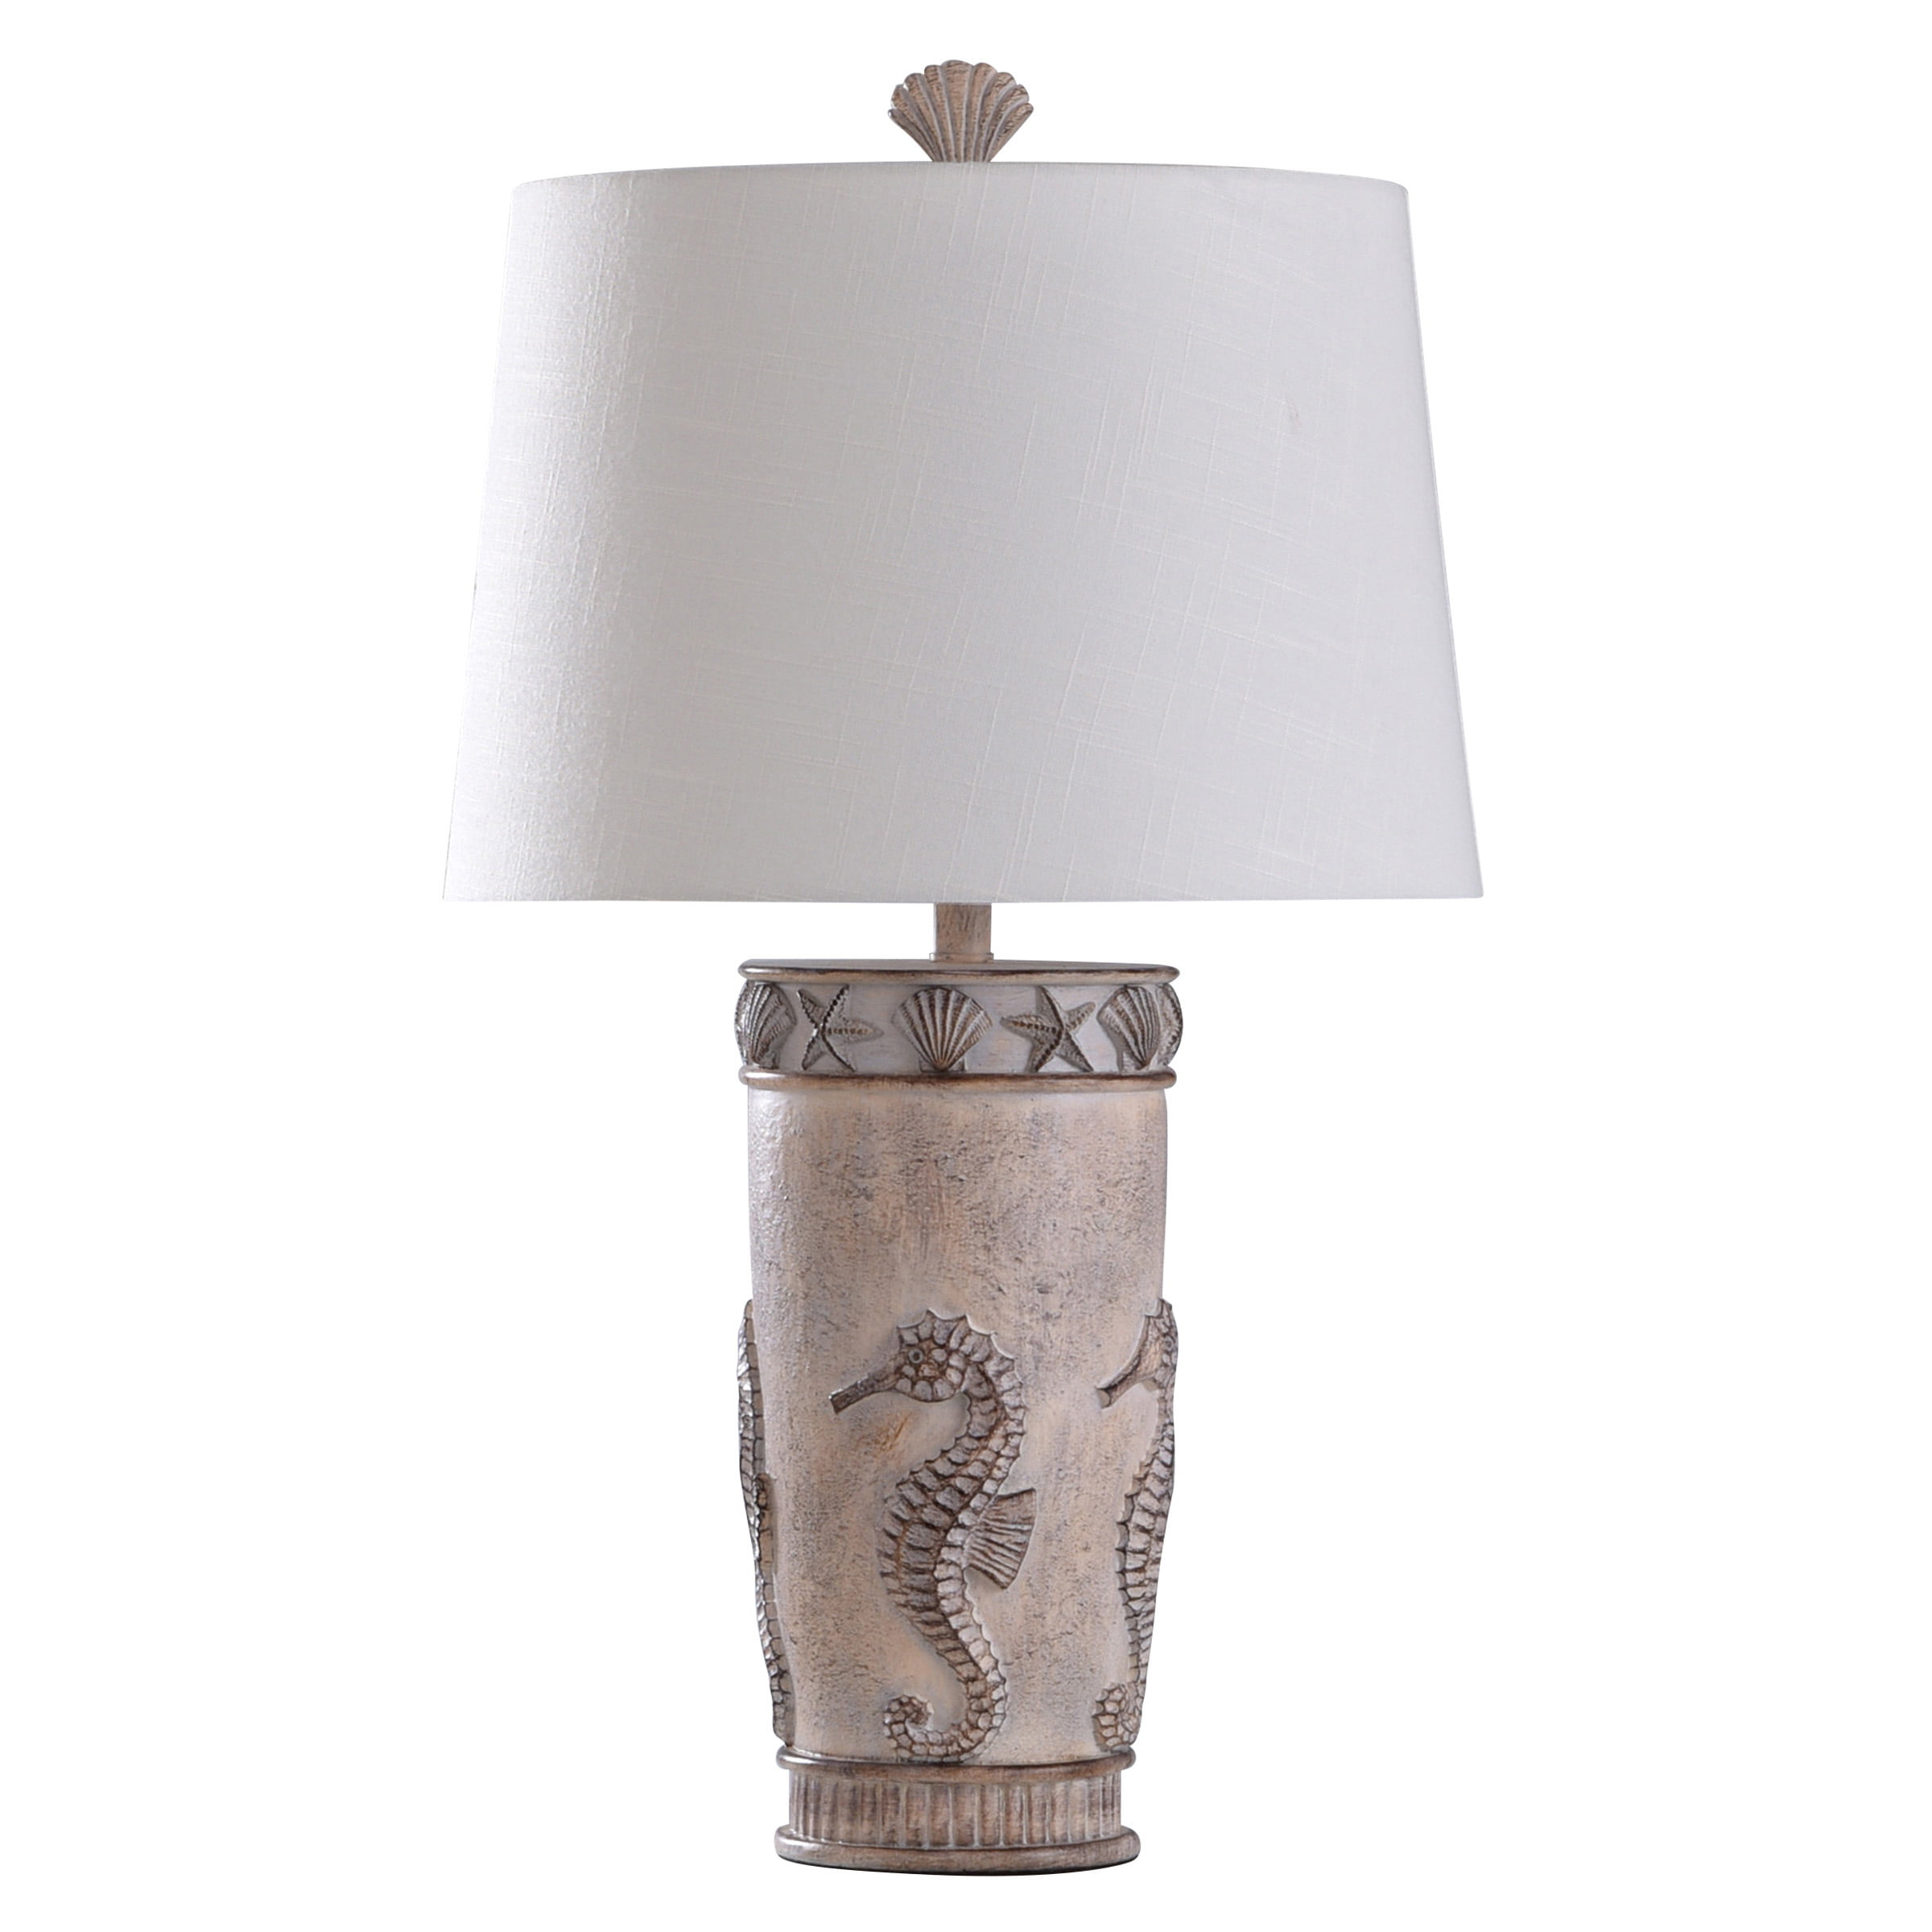 Style Craft Coastal Moulded Table Lamp, Silver Seahorse Table Lamp